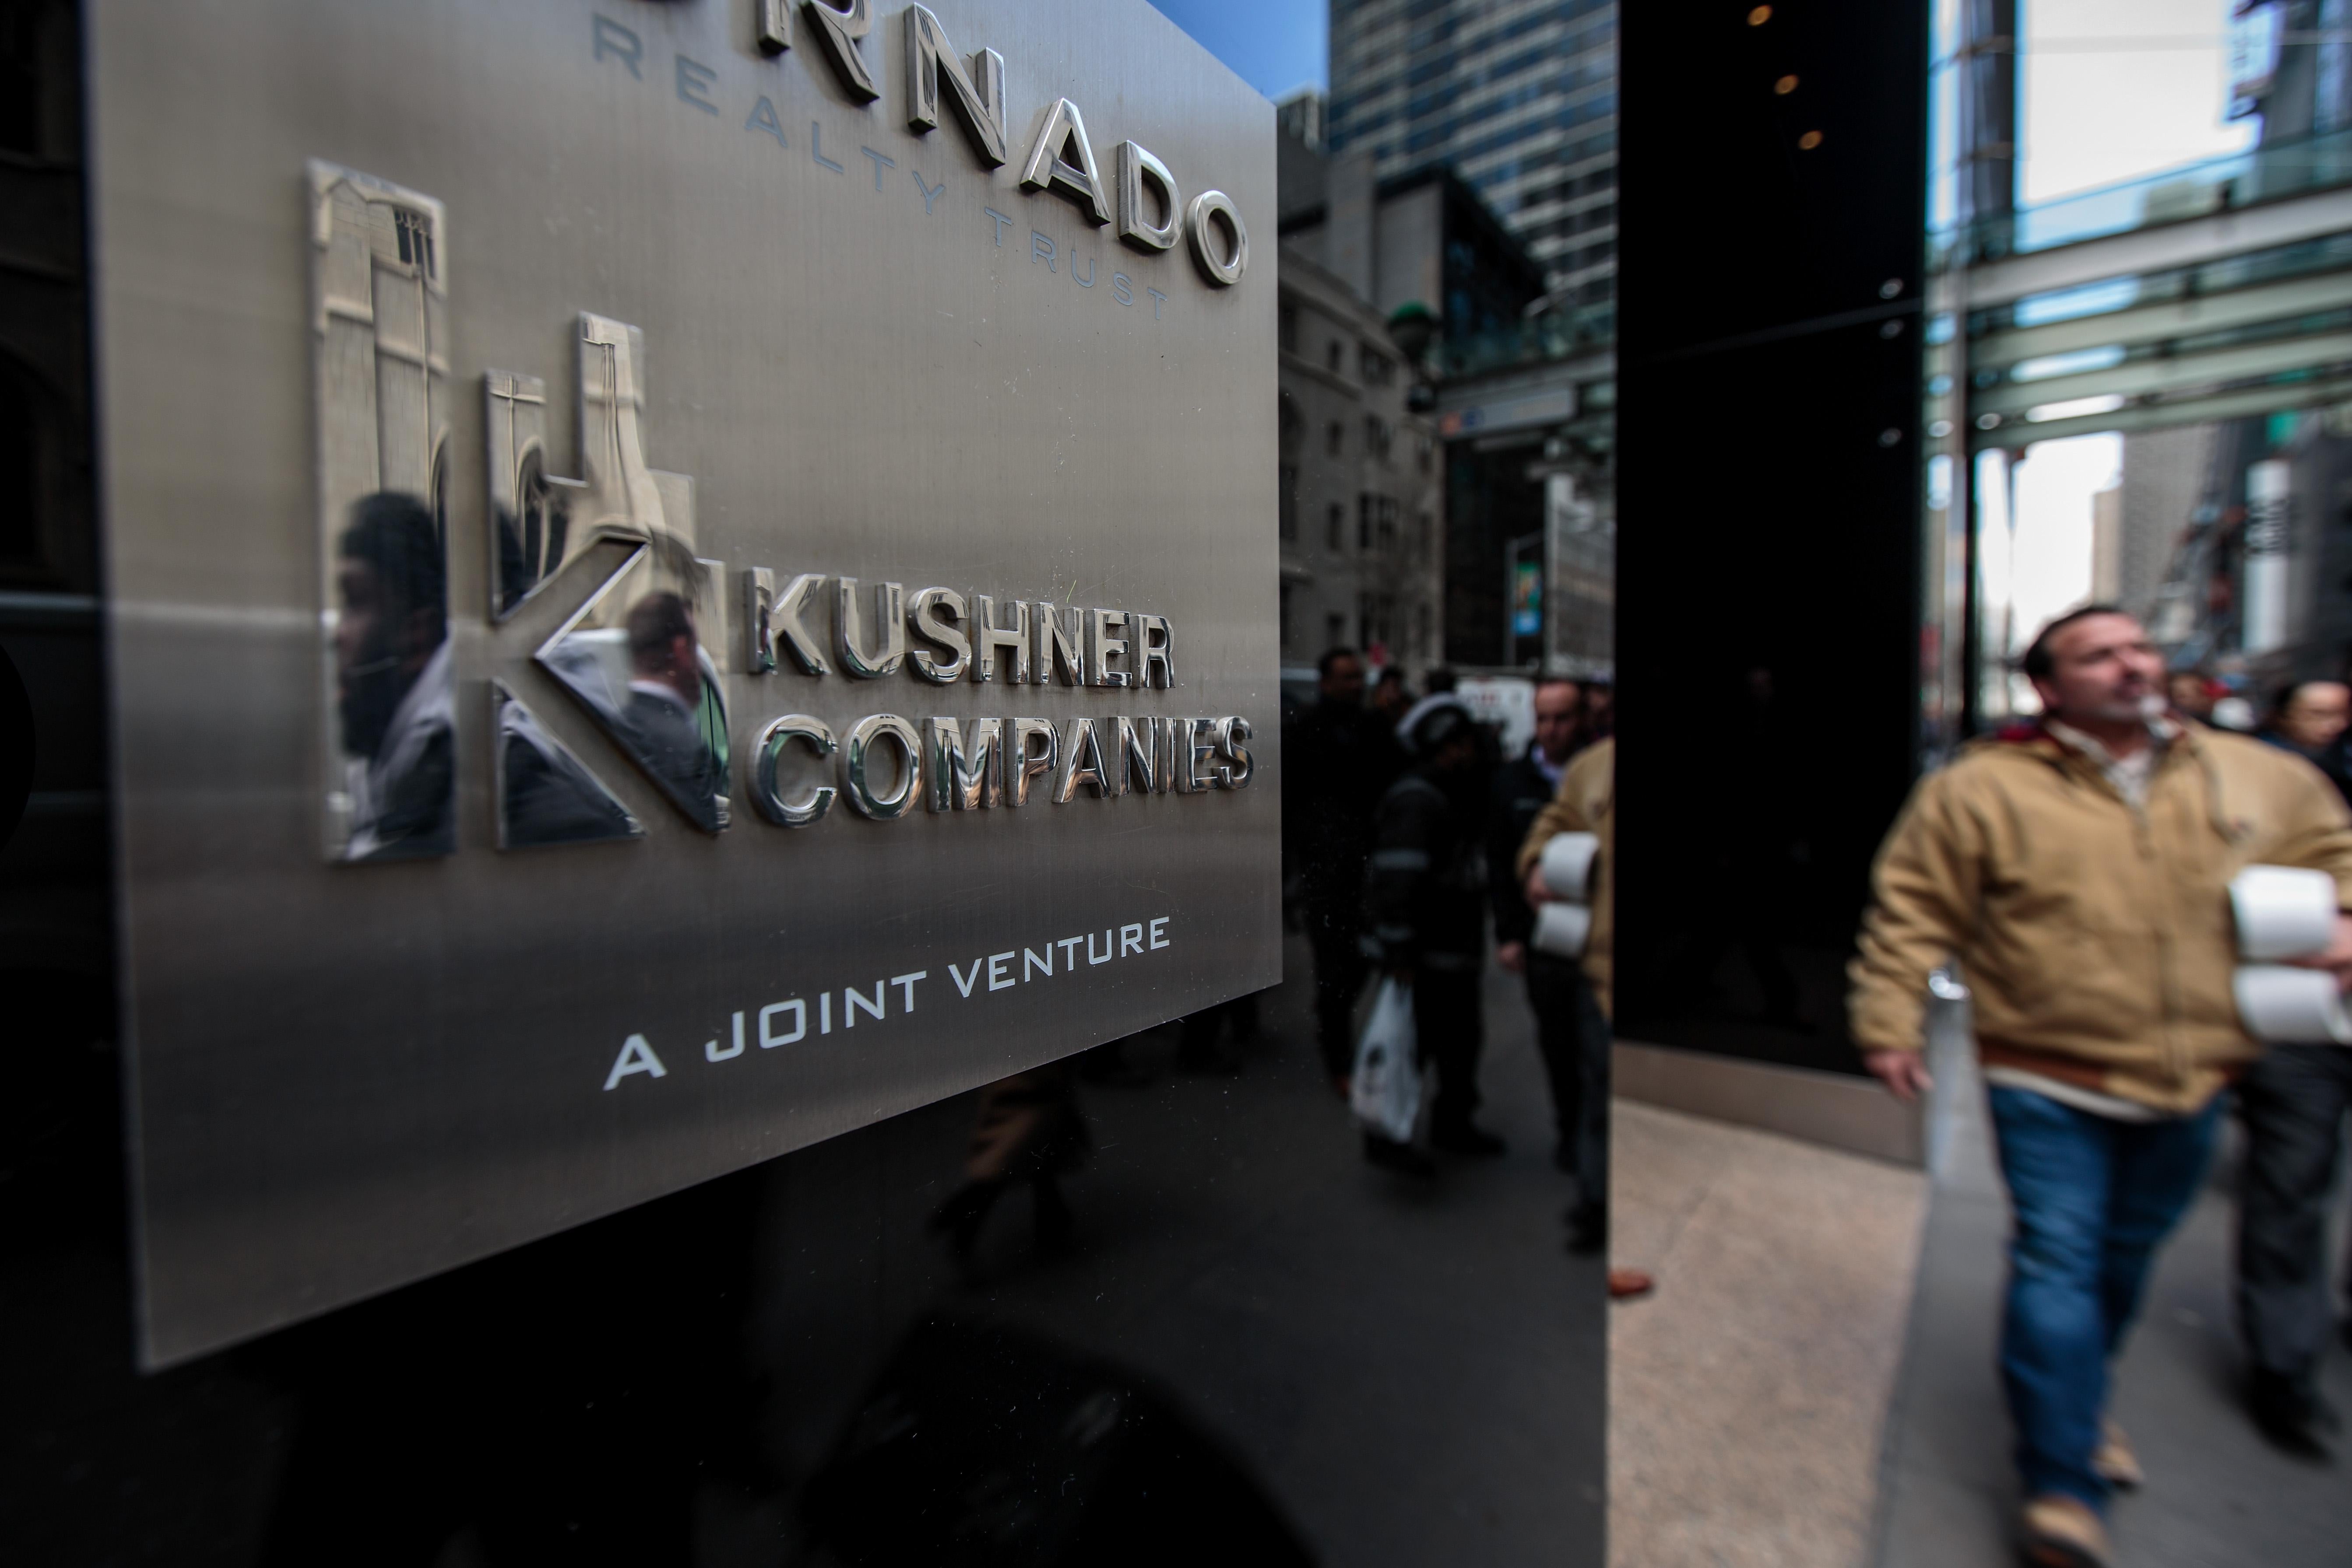 A Kushner Companies logo is visible near an entrance to the Kushner Companies' flagship property 666 Fifth Avenue in Midtown Manhattan, March 6, 2018 in New York City. 